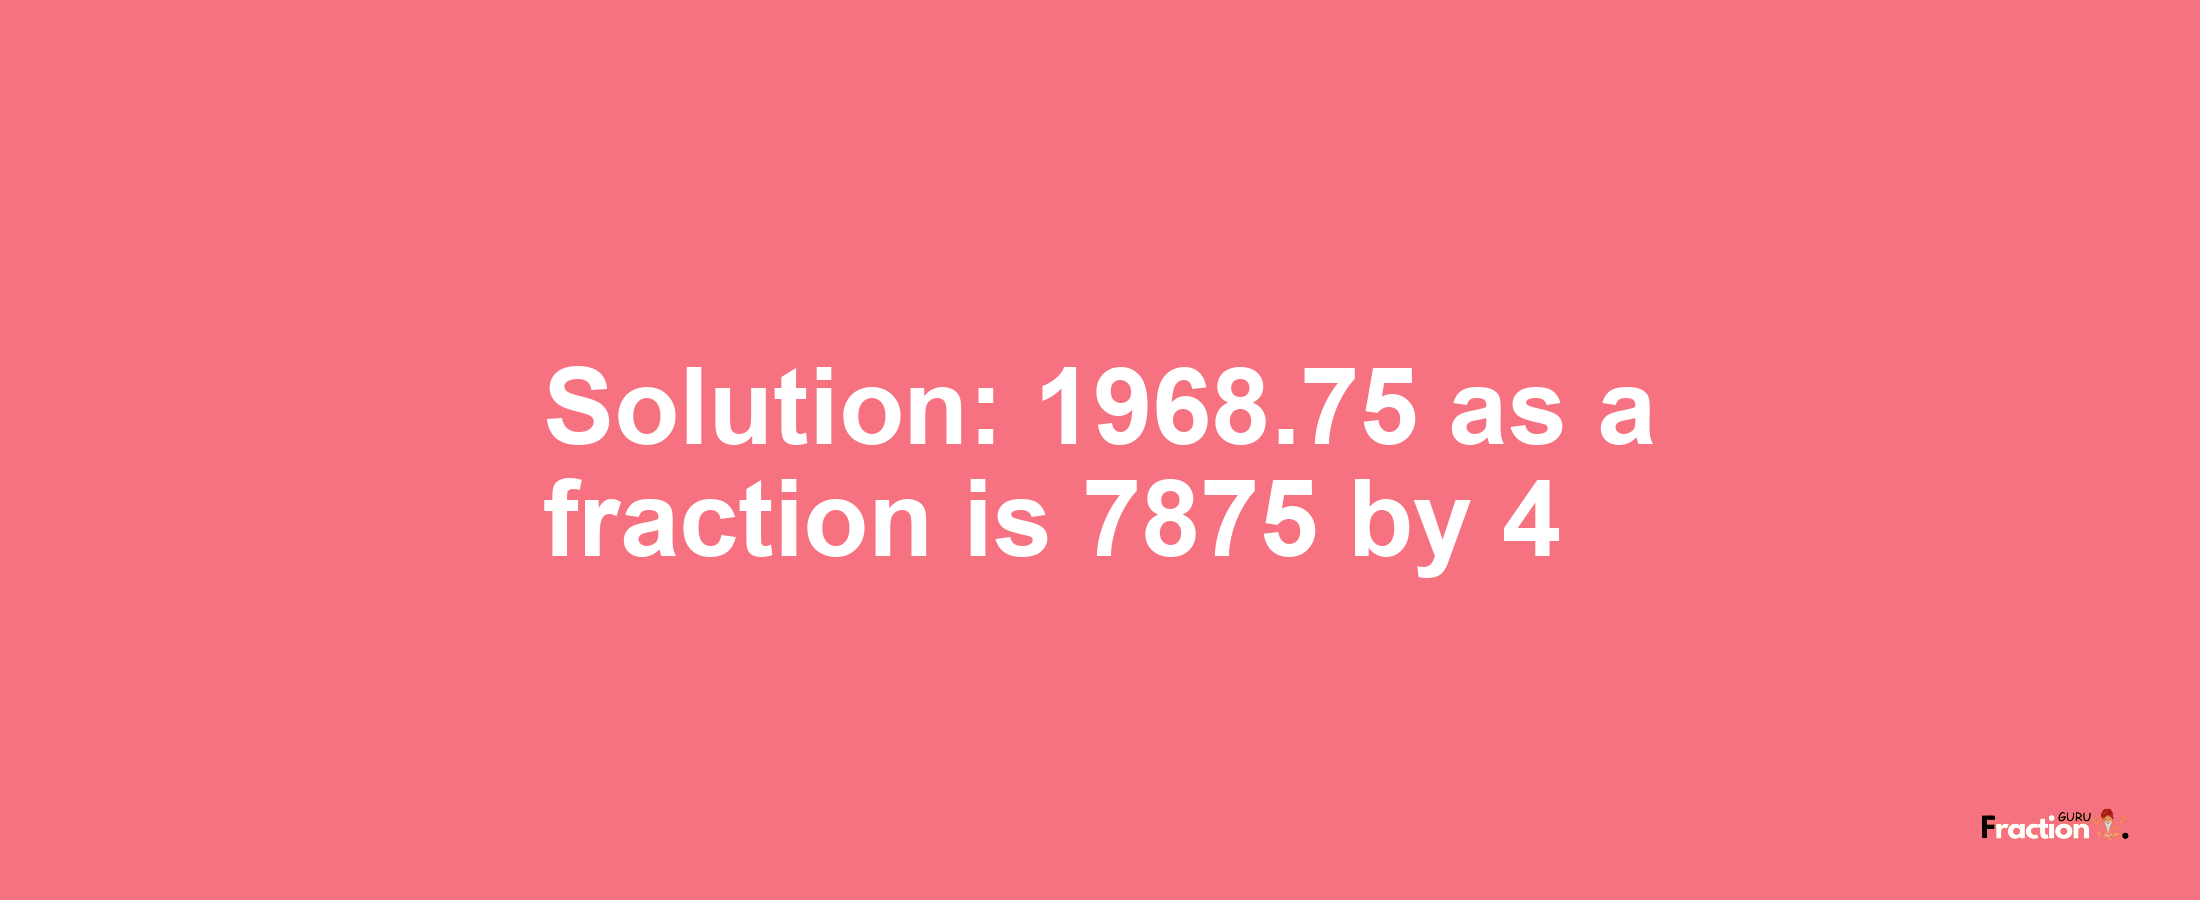 Solution:1968.75 as a fraction is 7875/4